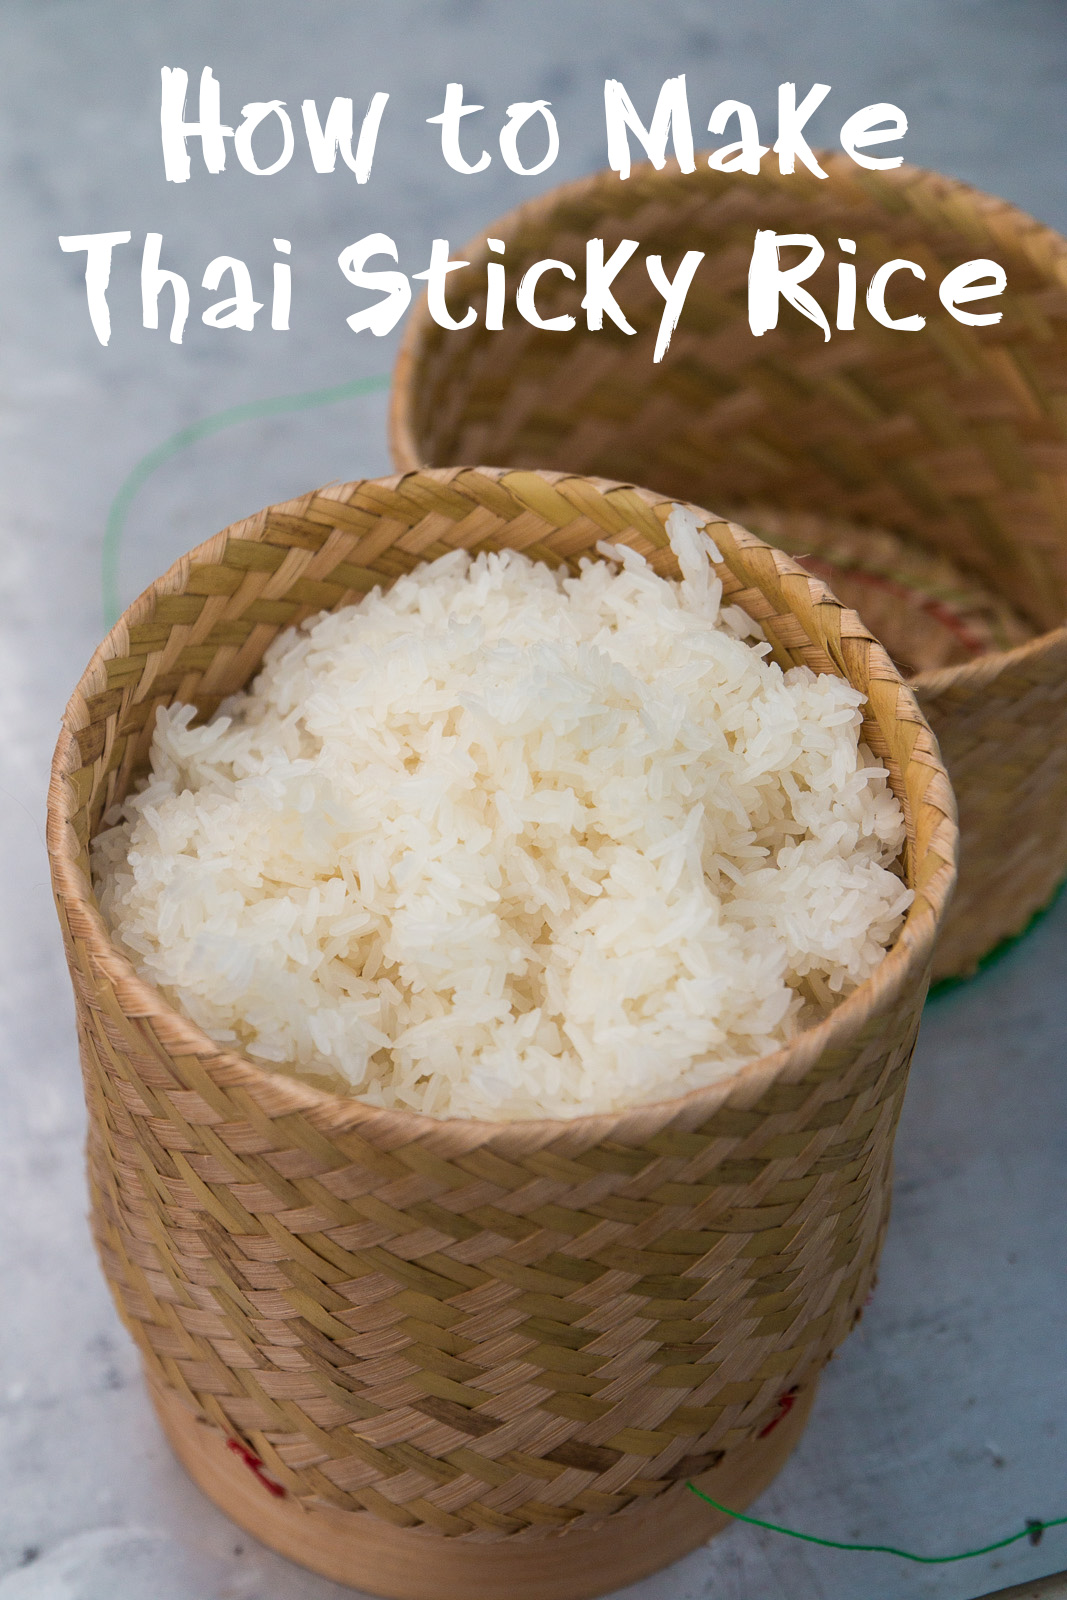 How To Make Thai Sticky Rice So It S Fluffy And Moist